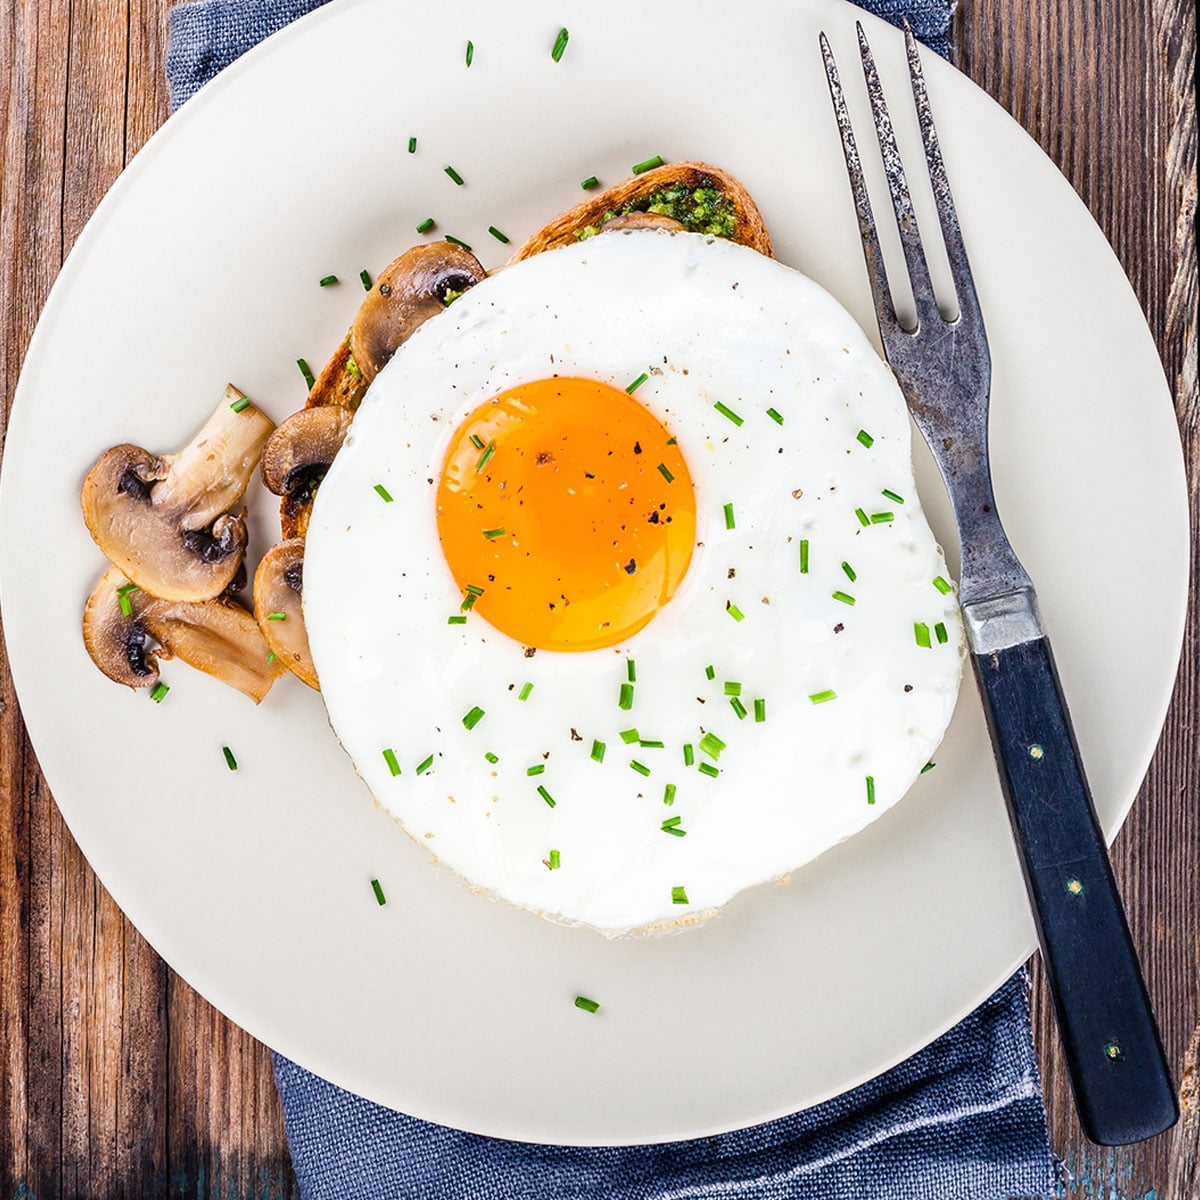 You just need to keep a careful eye out during the reheating process. Rubbery egg whites are a common occurrence with reheated fried eggs, so keep that in mind.